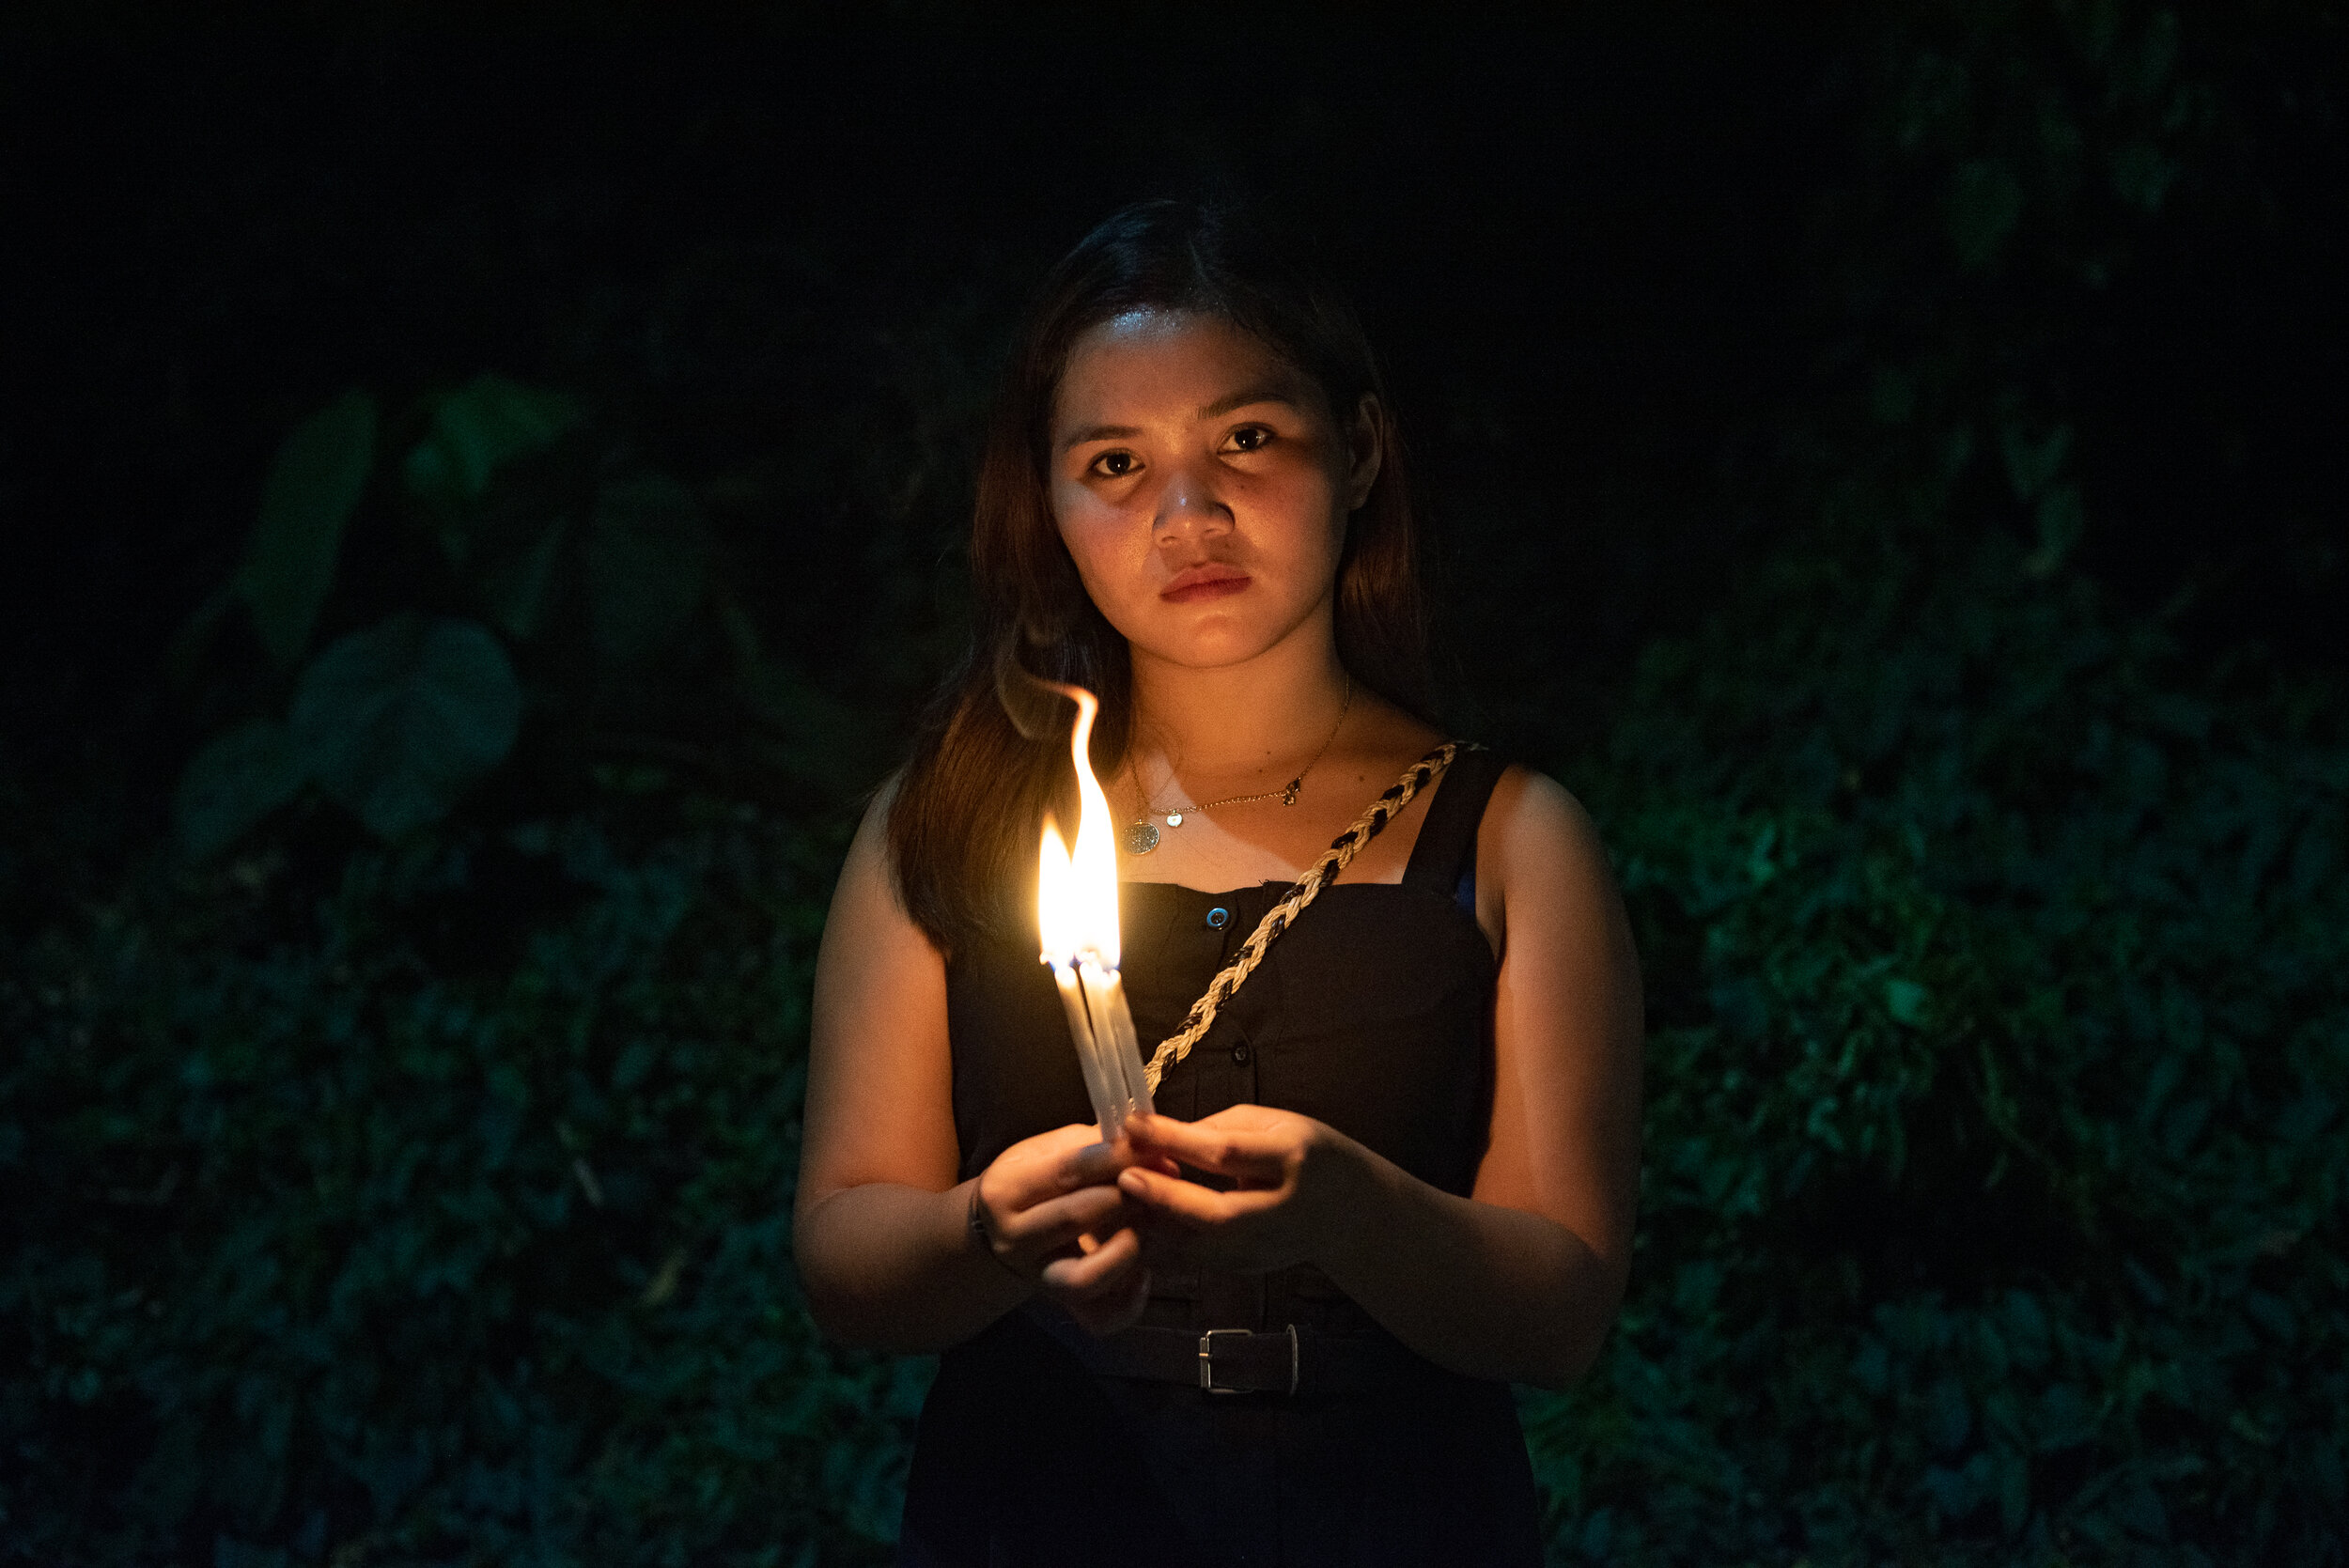  Marinel Ubaldo, a typhoon Haiyan survivor, holding a lit candle in commemoration of the typhoon's 6th Anniversary last November 8 in Tacloban City, Leyte. Marinel has spoken and attended events all over the world, including the 2015 UN Climate Chang